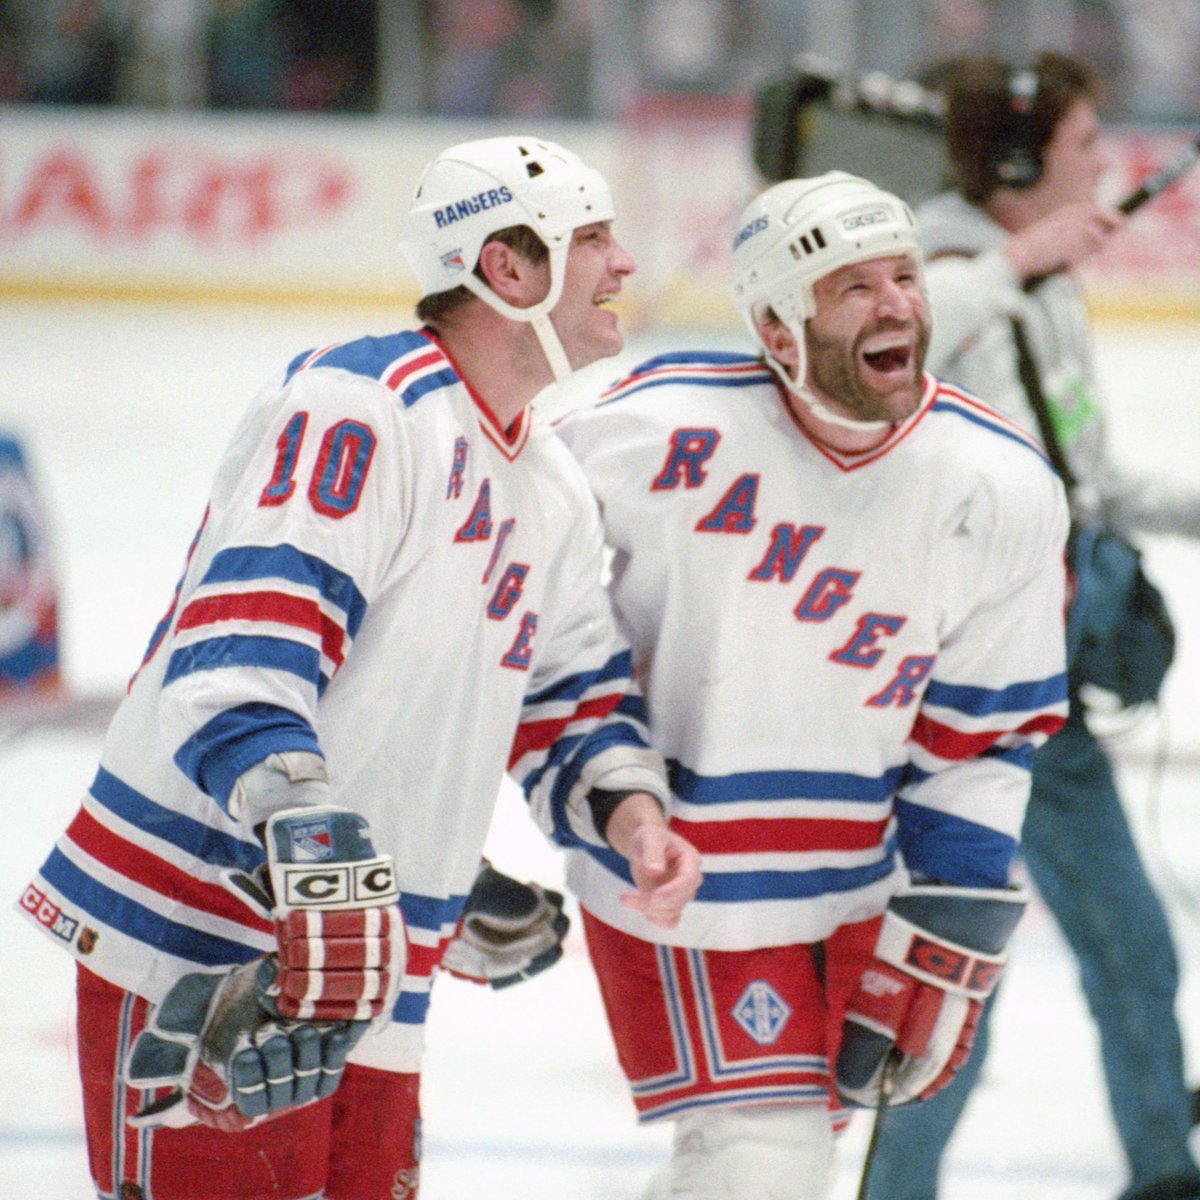 The Rangers have started the postseason 7-0. The last time they did that? 1994.